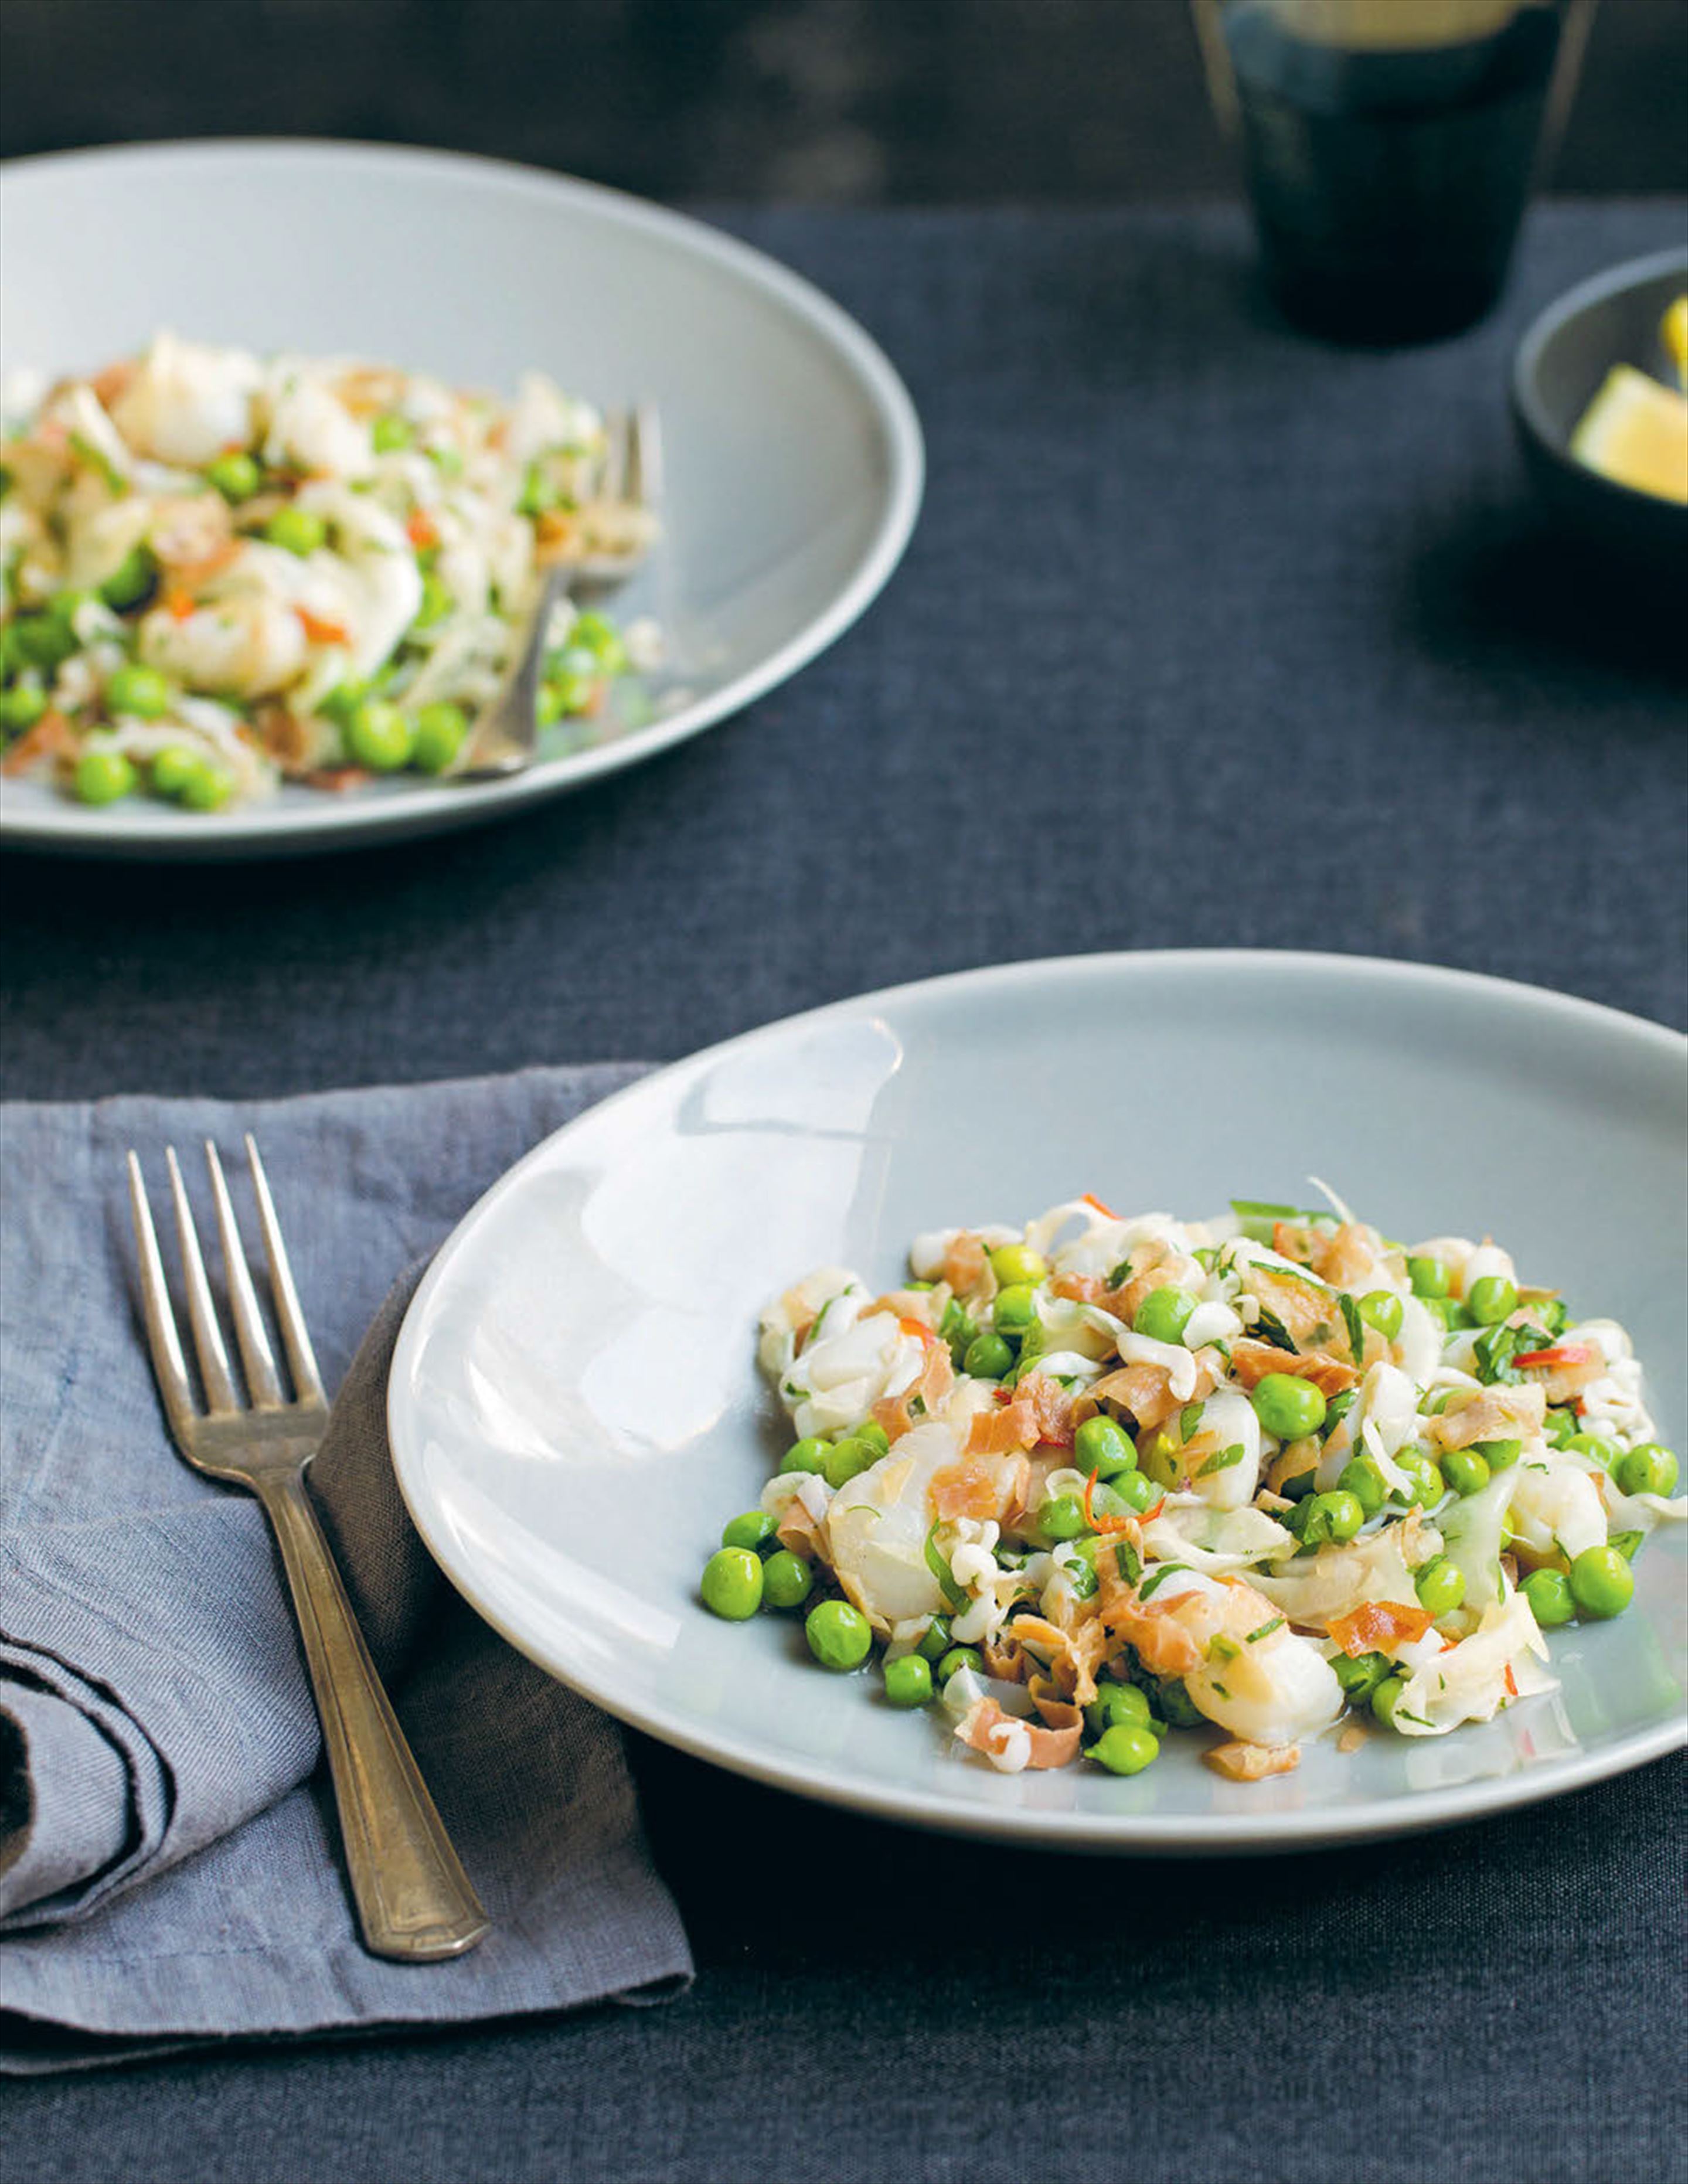 Cuttlefish, scallops and fennel with pea and prosciutto dressing